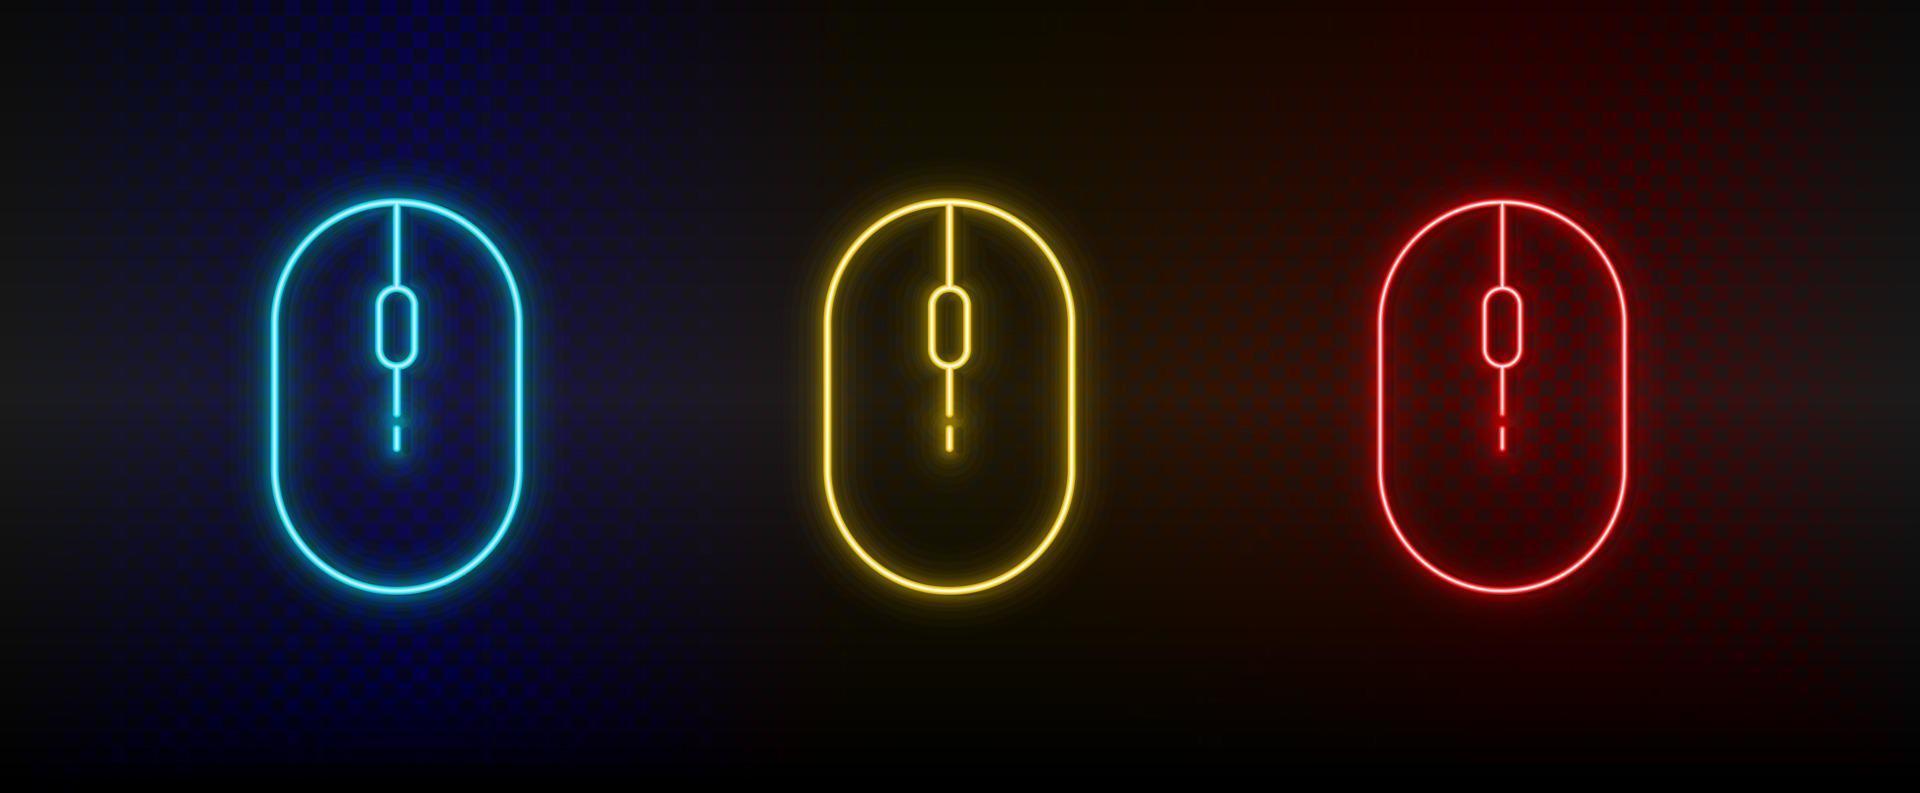 Neon icon set Click hardware mouse. Set of red, blue, yellow neon vector icon on transparency dark background